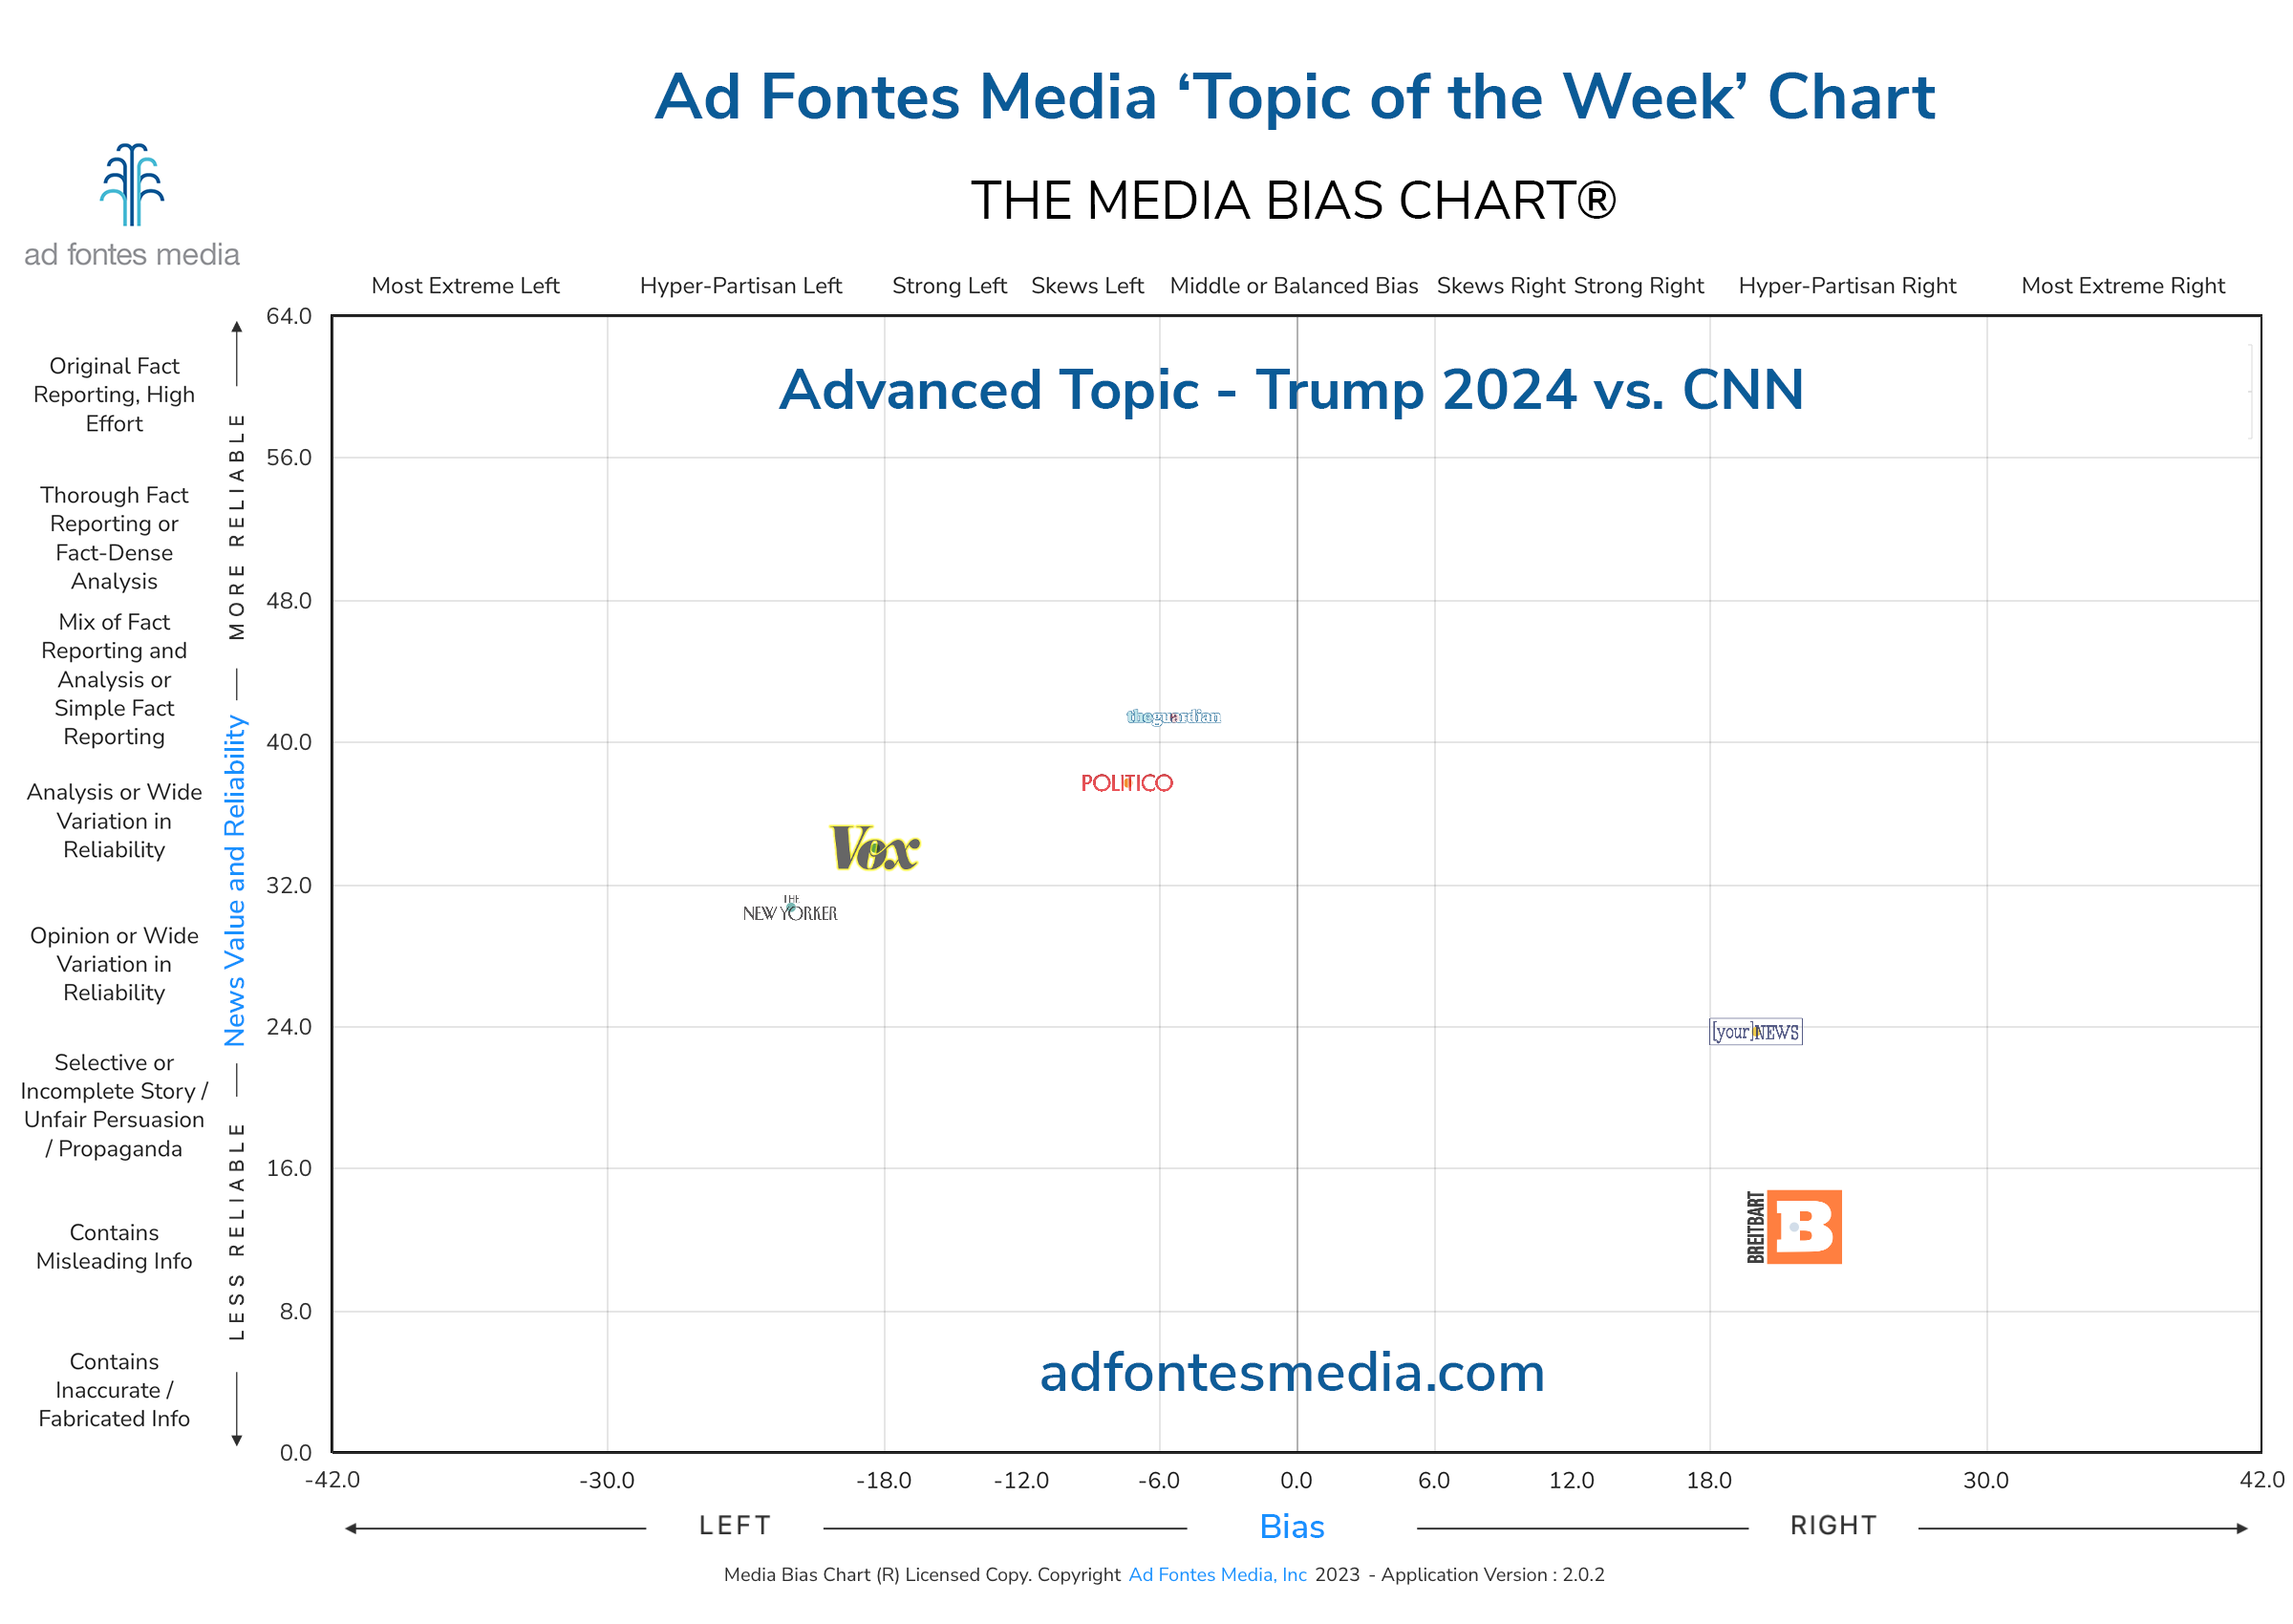 Scores of the Trump 2024 vs. CNN articles on the chart